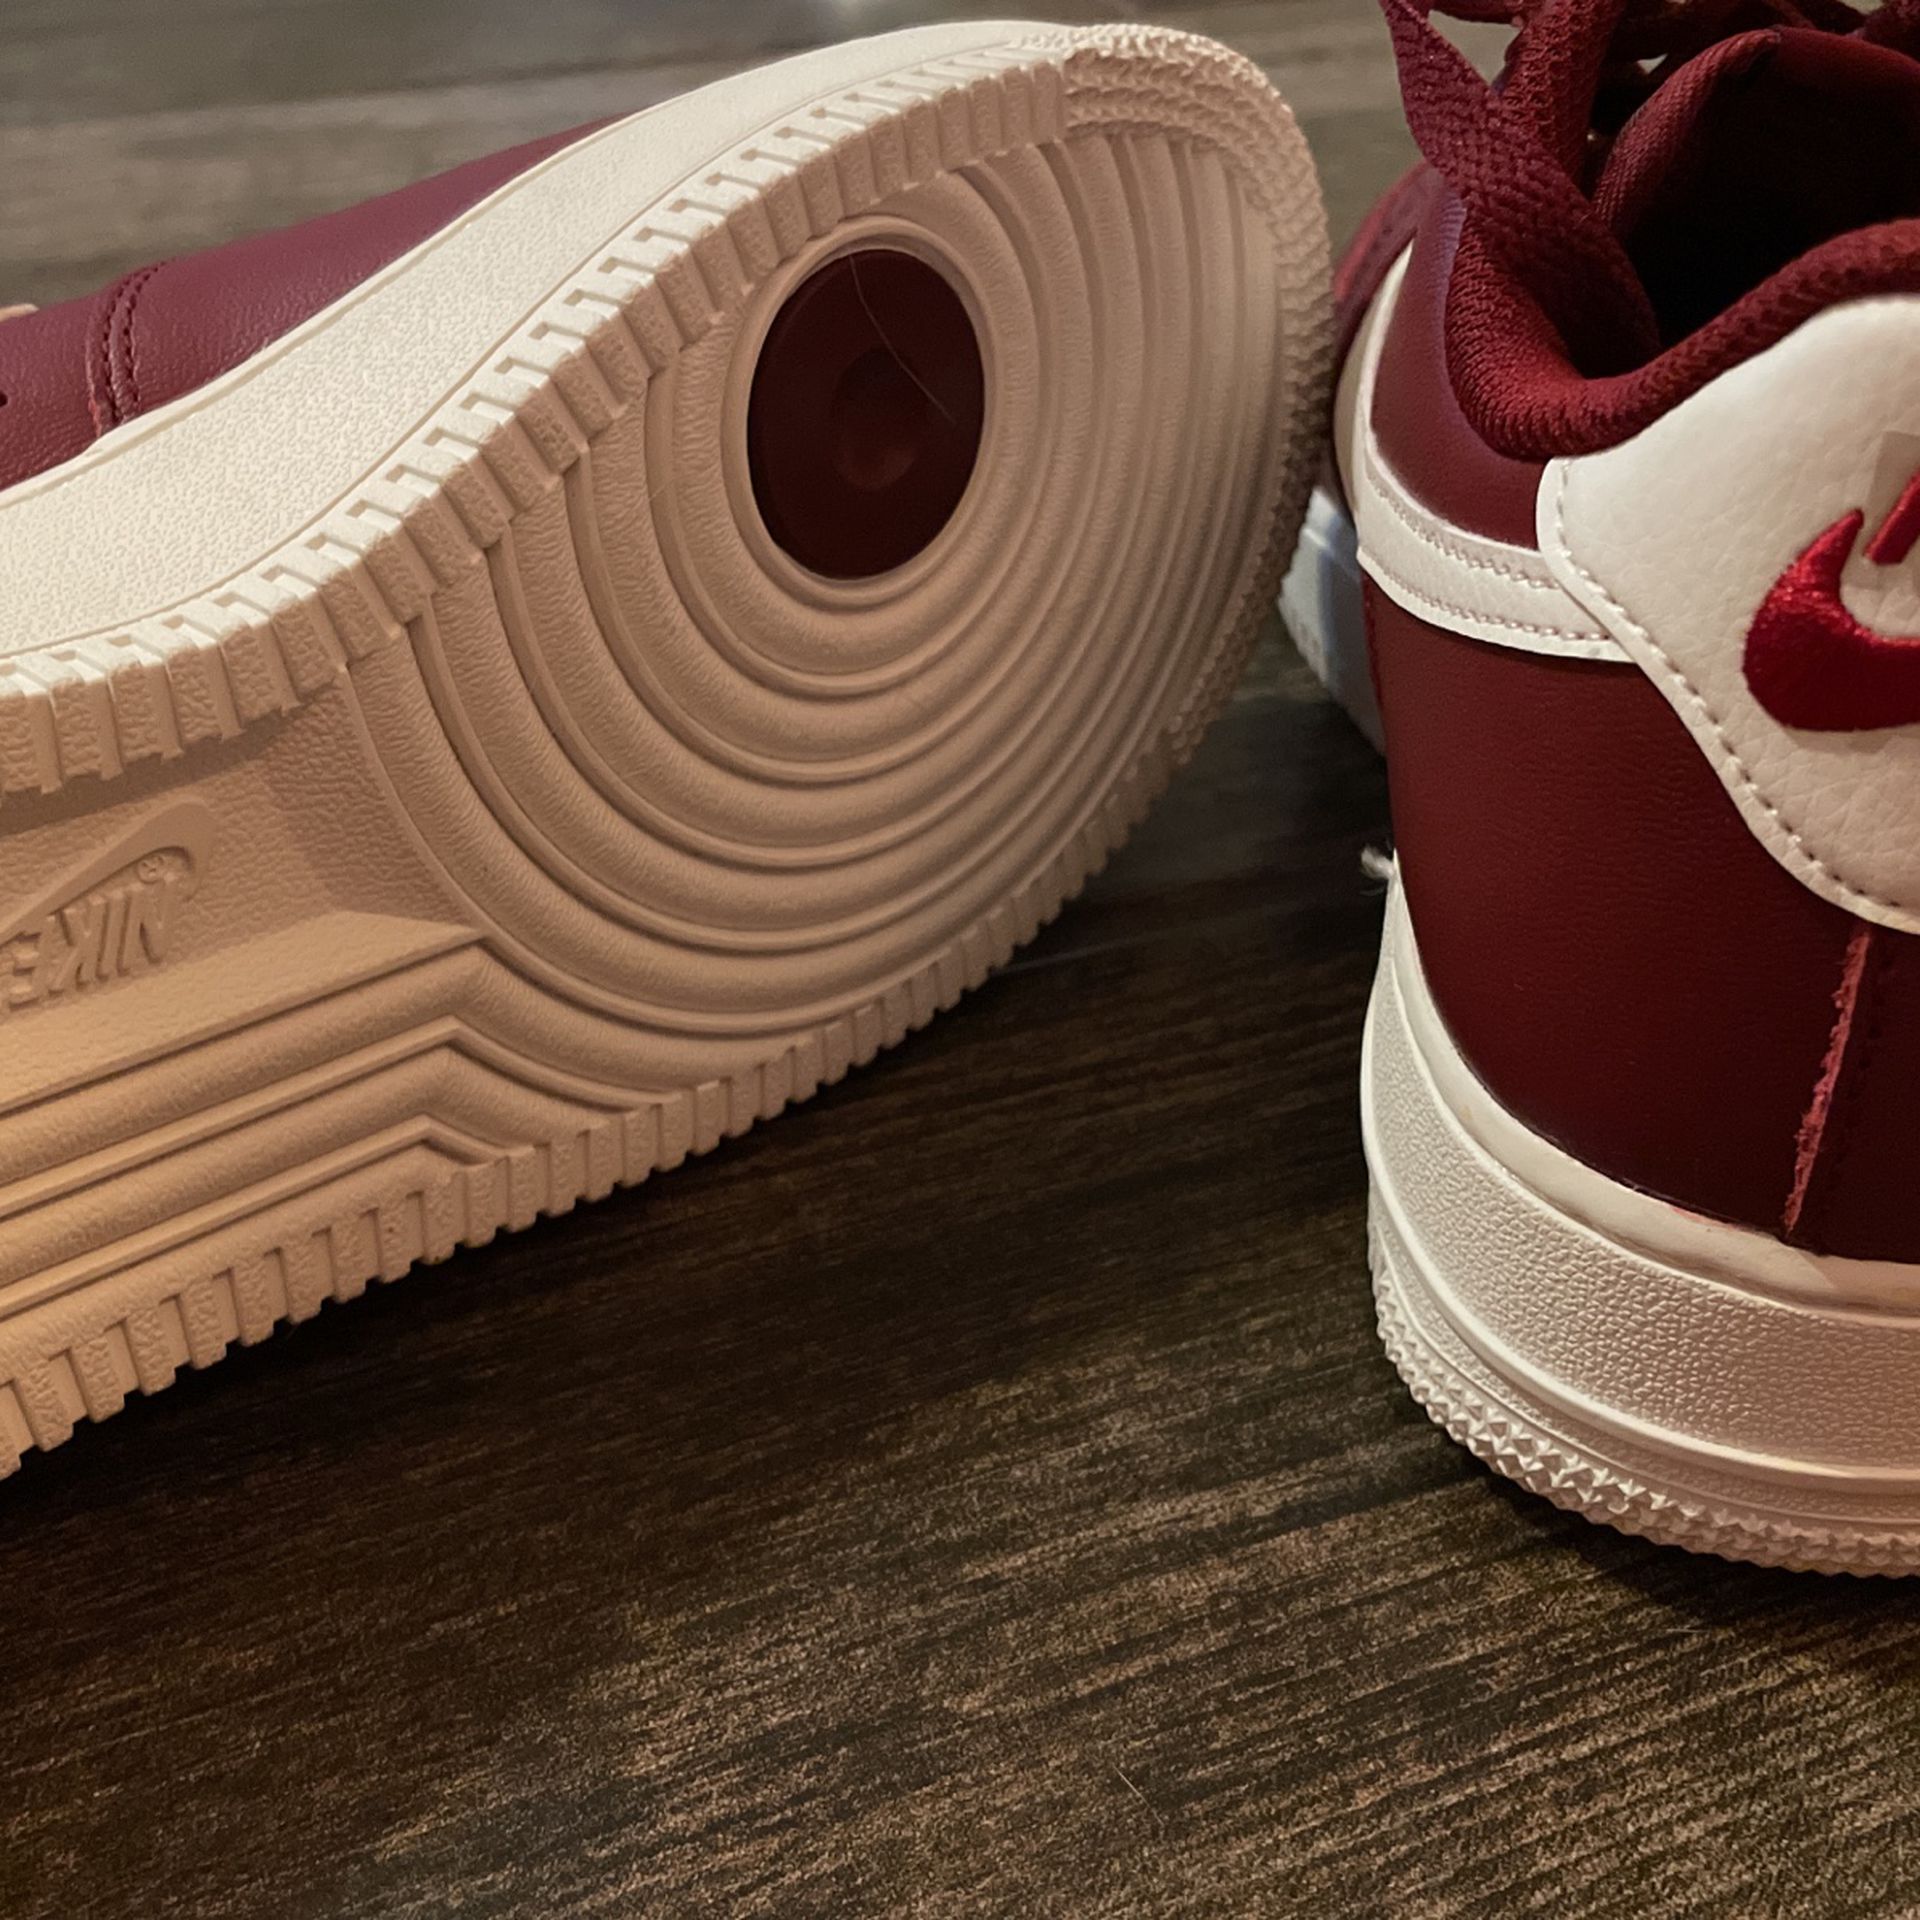 Nike Air Force 1 '82 Red And White for Sale in Glendale, AZ - OfferUp